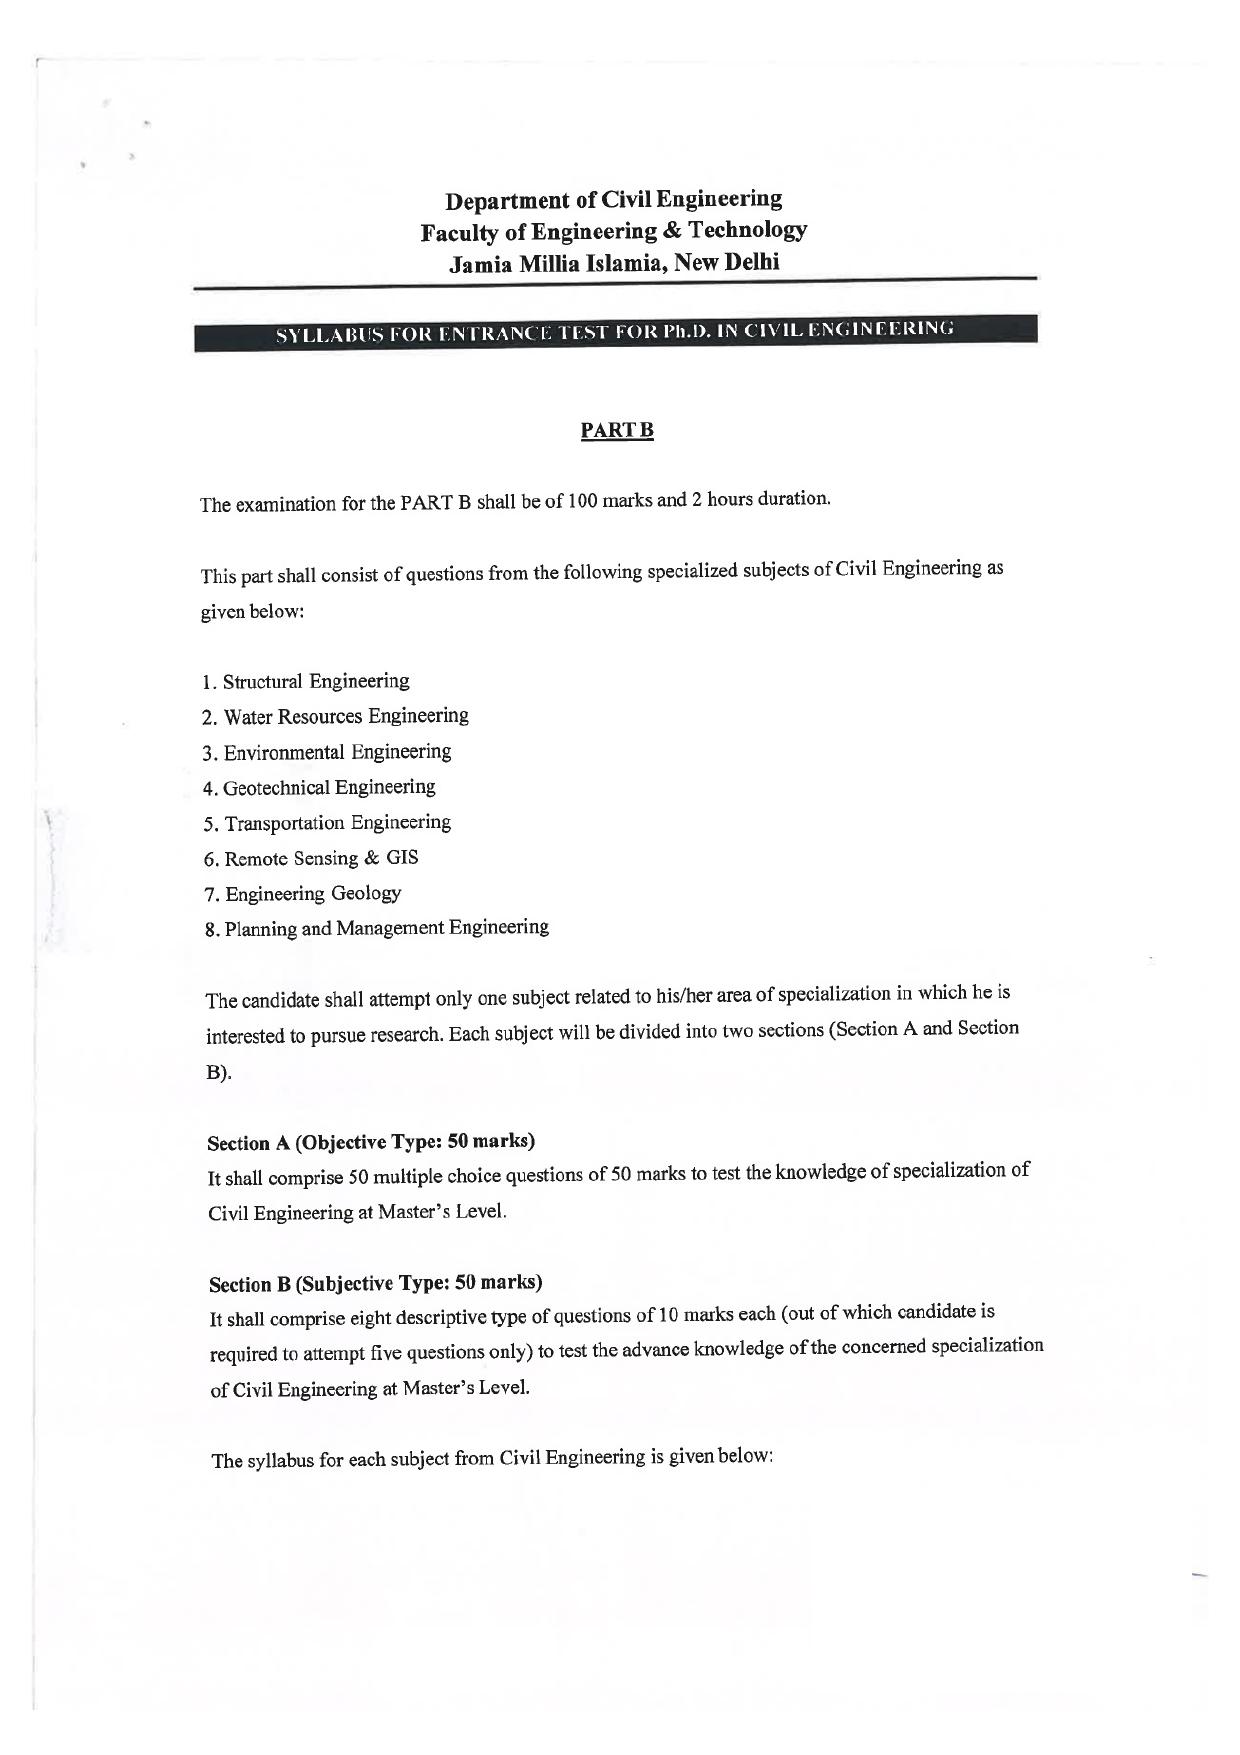 JMI Entrance Exam FACULTY OF ENGINEERING & TECHNOLOGY Syllabus - Page 6